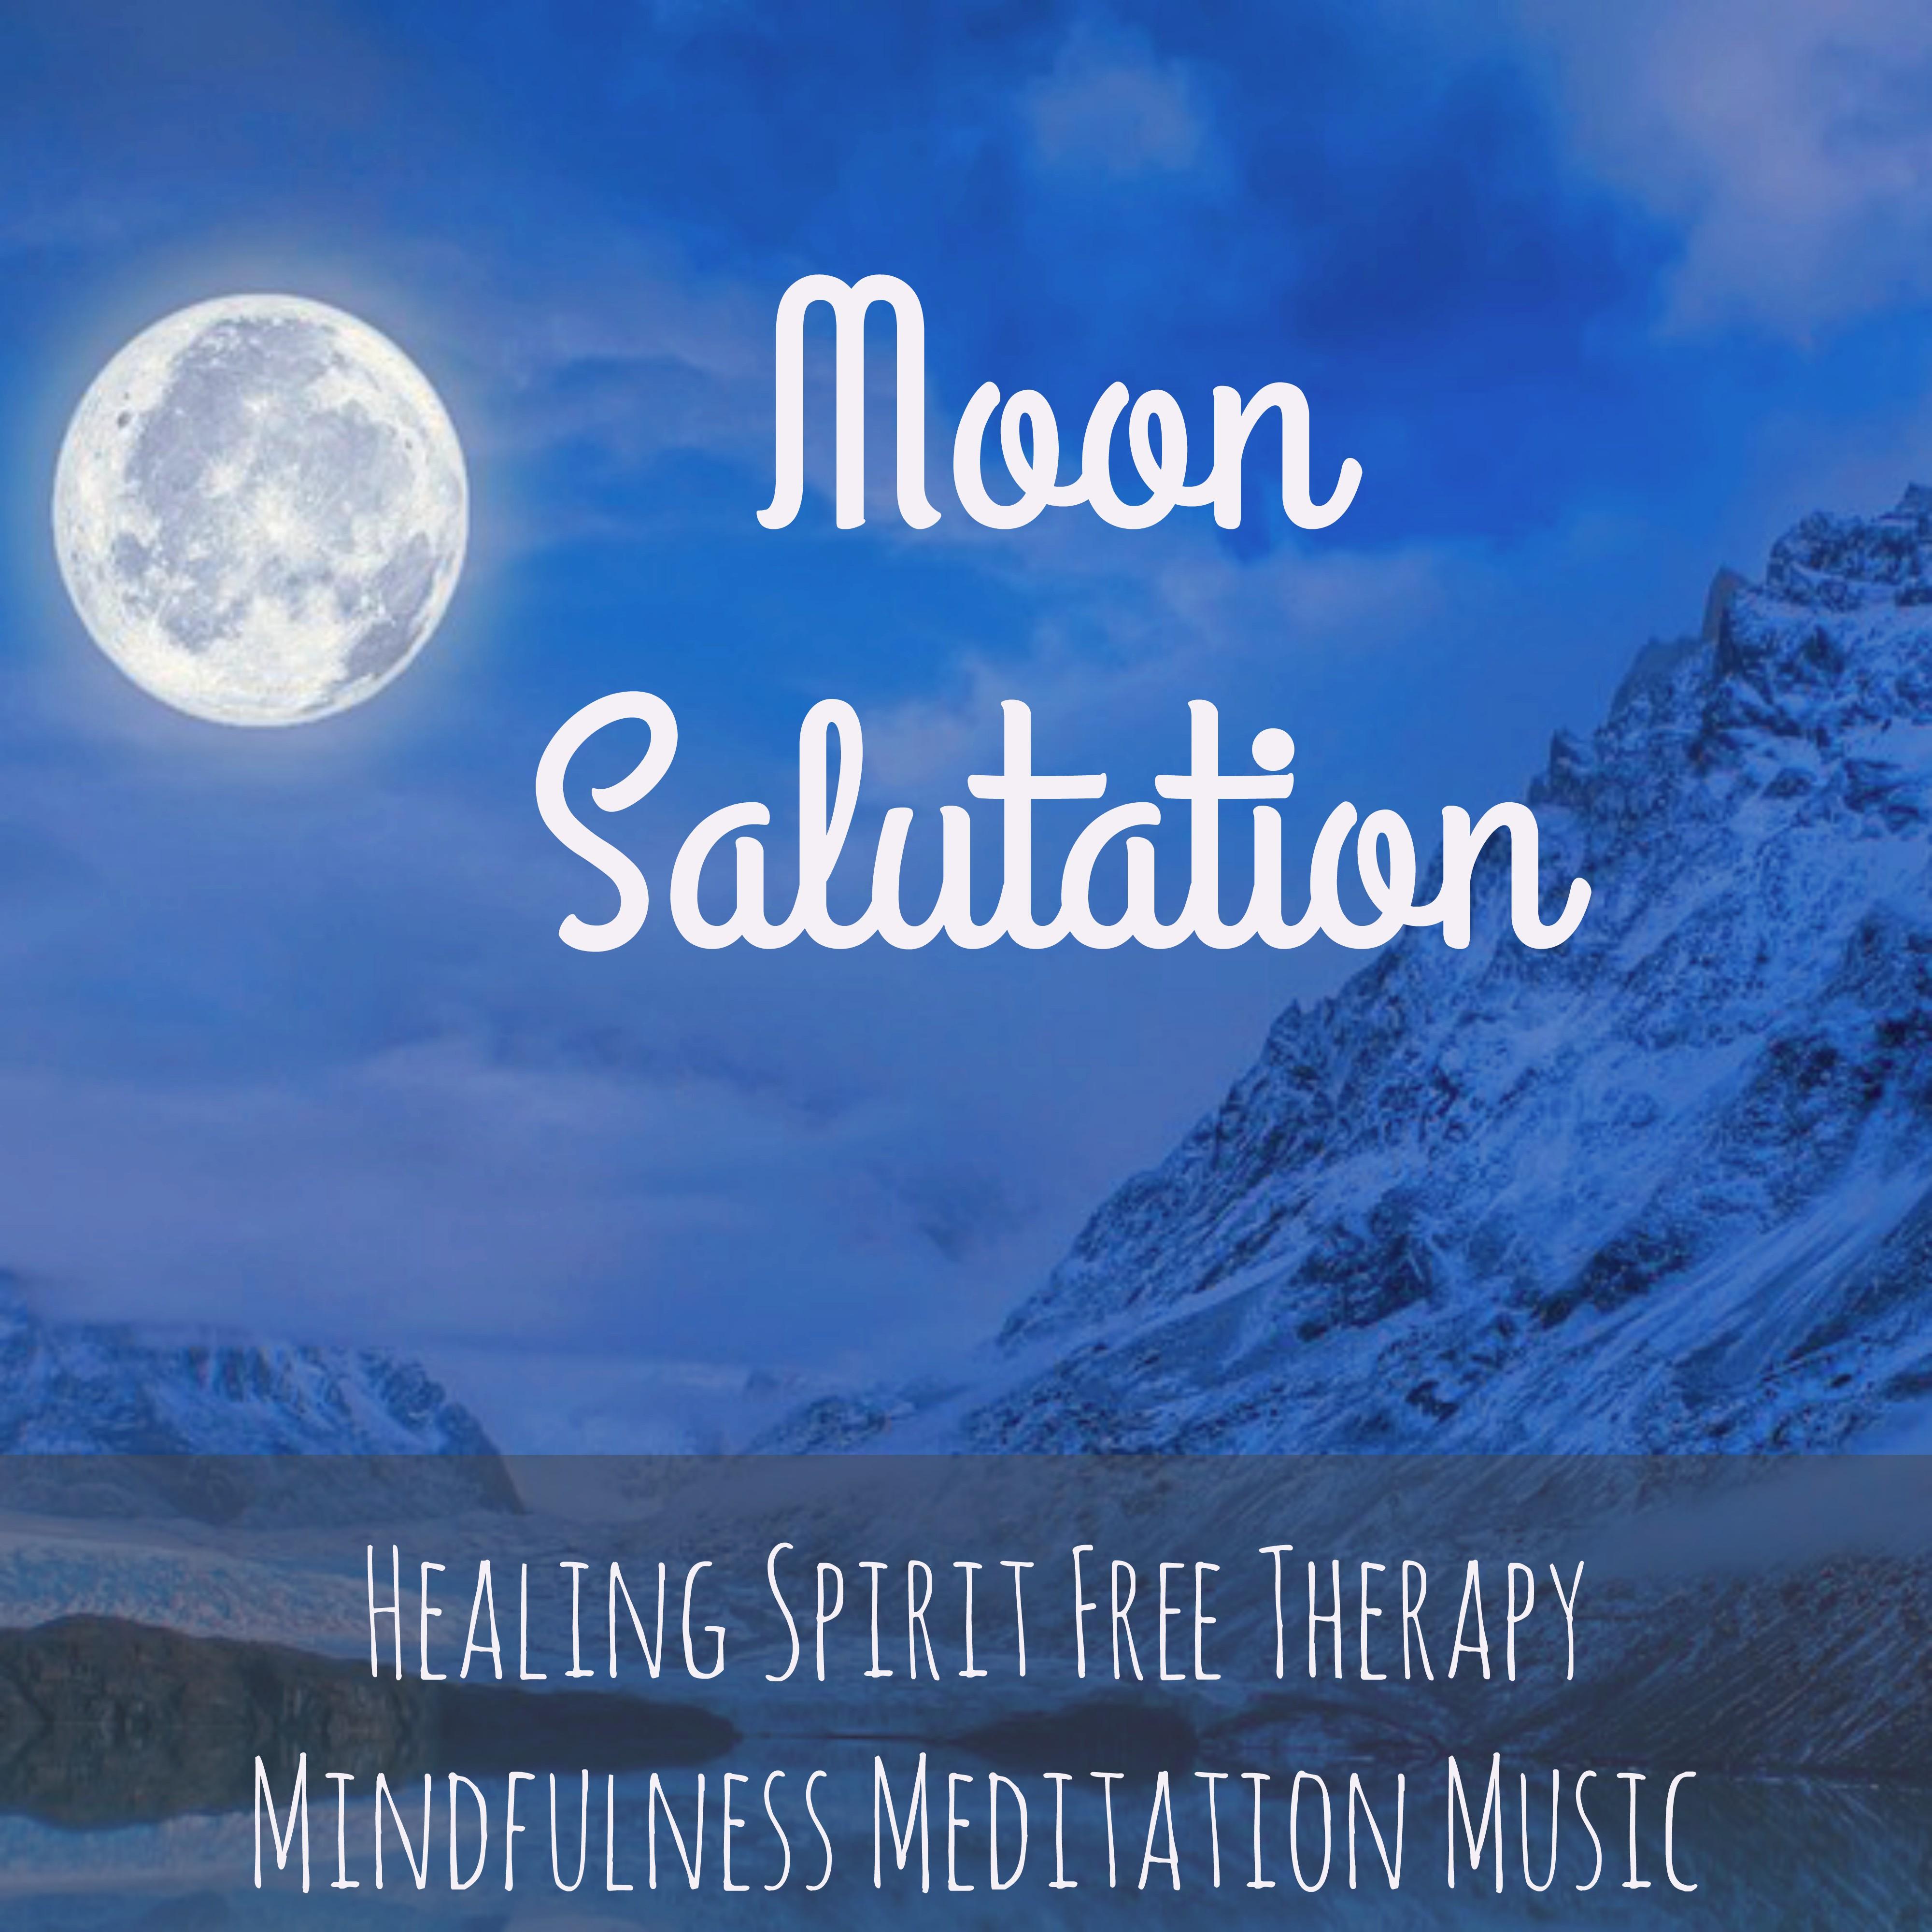 Moon Salutation - Healing Spirit Free Therapy Mindfulness Meditation Music with Instrumental New Age Binaural Sounds